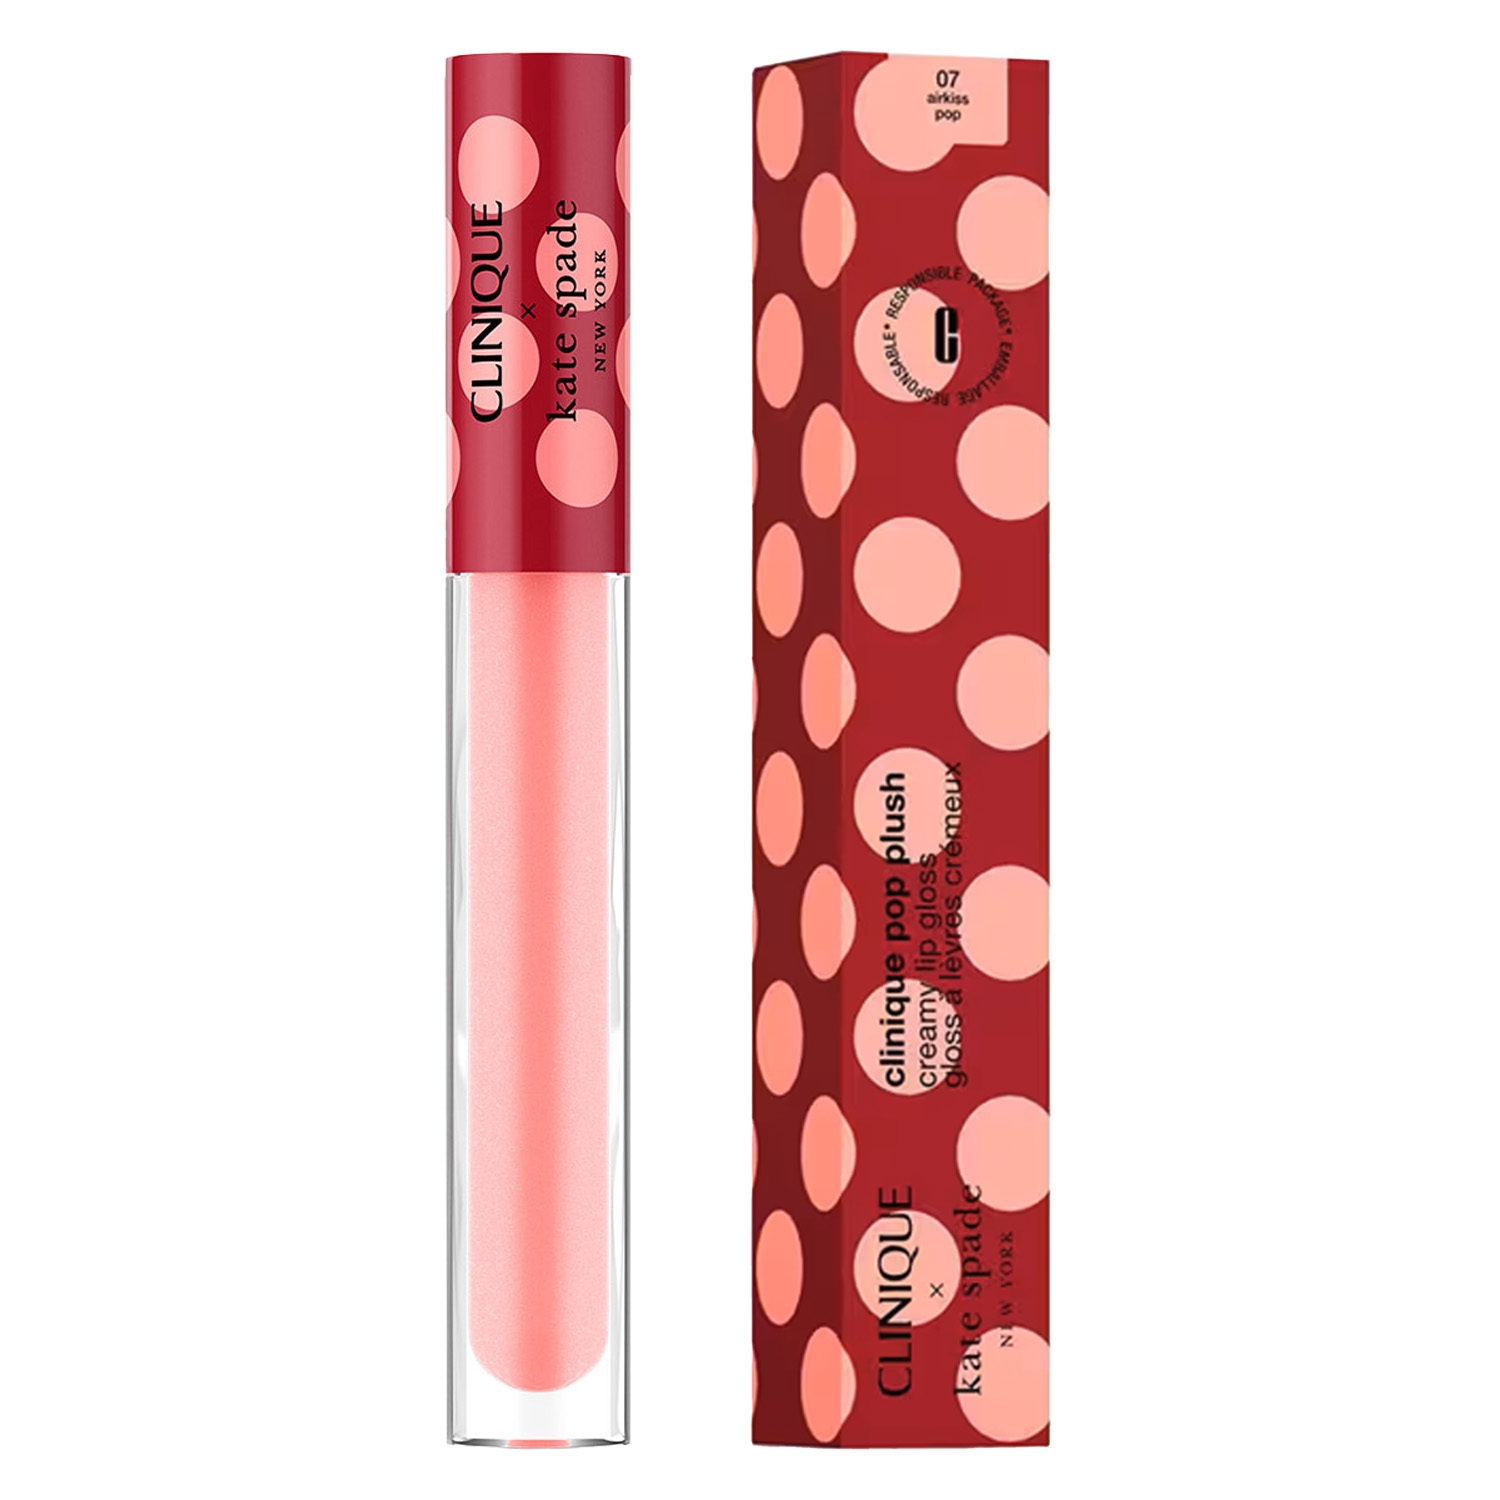 Product image from Clinique Lips - Decorated Kate Spade Pop Plush 07 Airkiss Pop